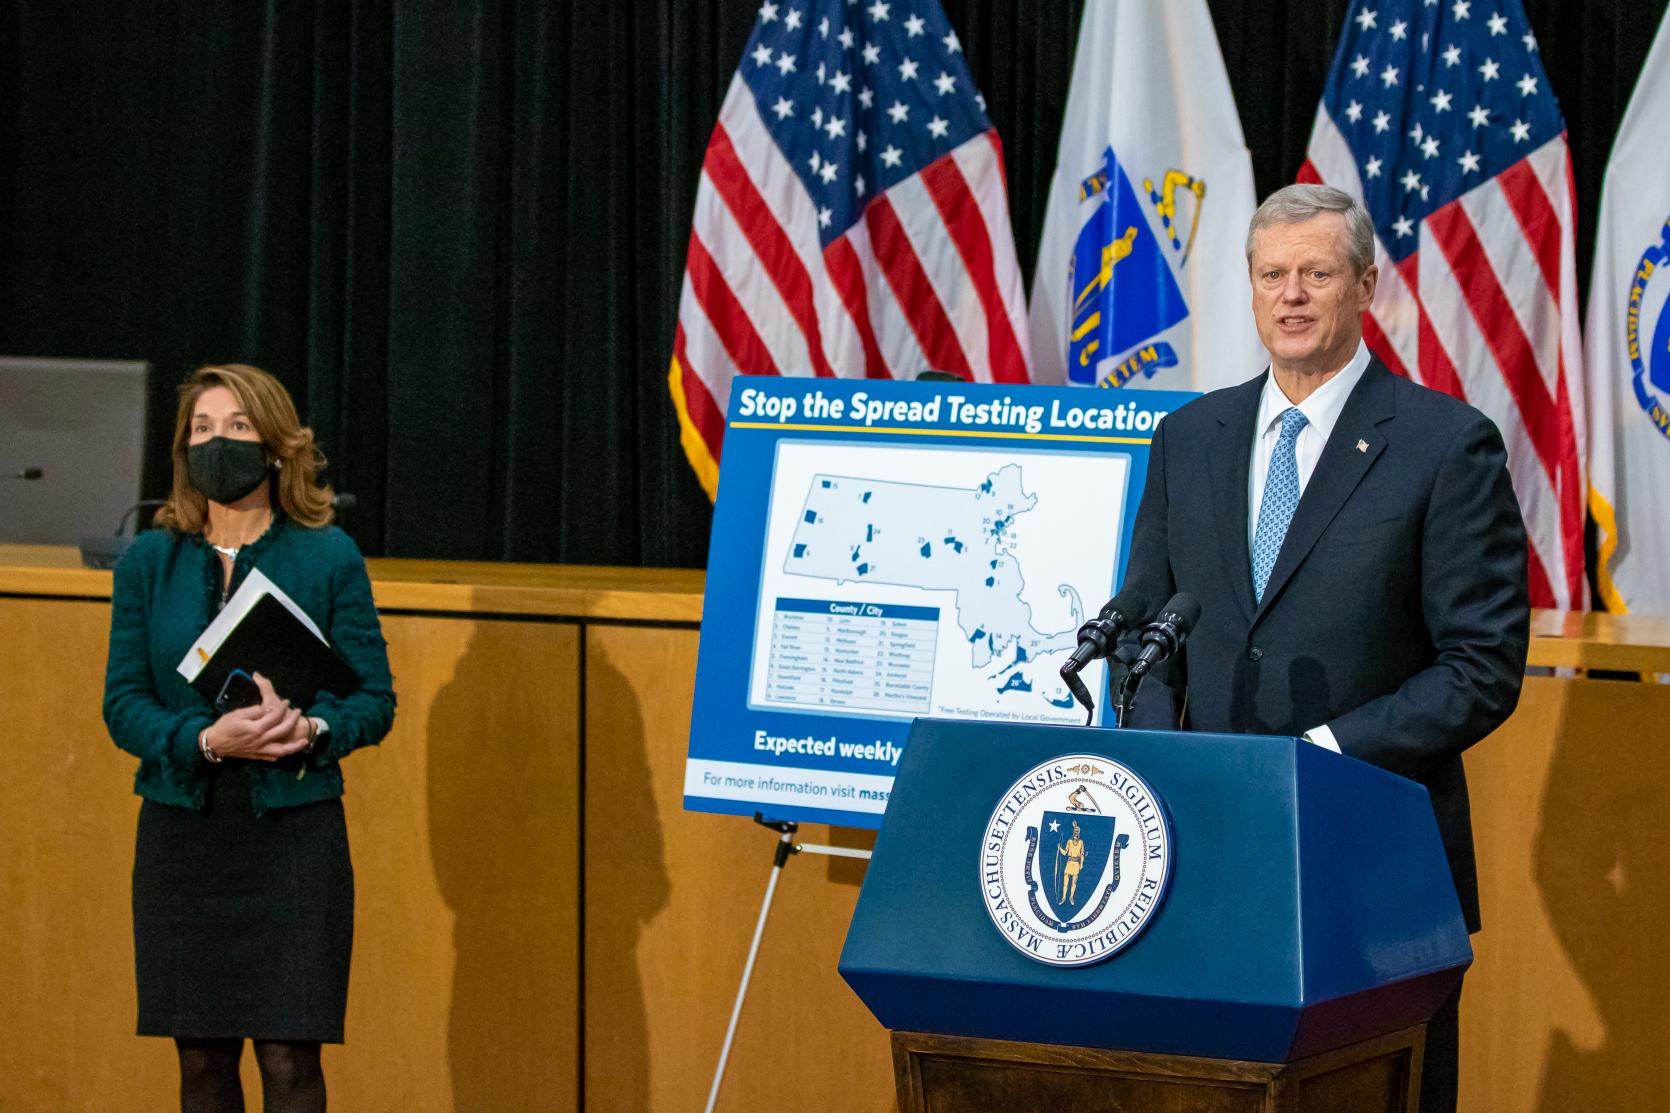 Baker-Polito Administration Launches New Testing Infrastructure to Increase Testing Capacity & Efficiency Statewide